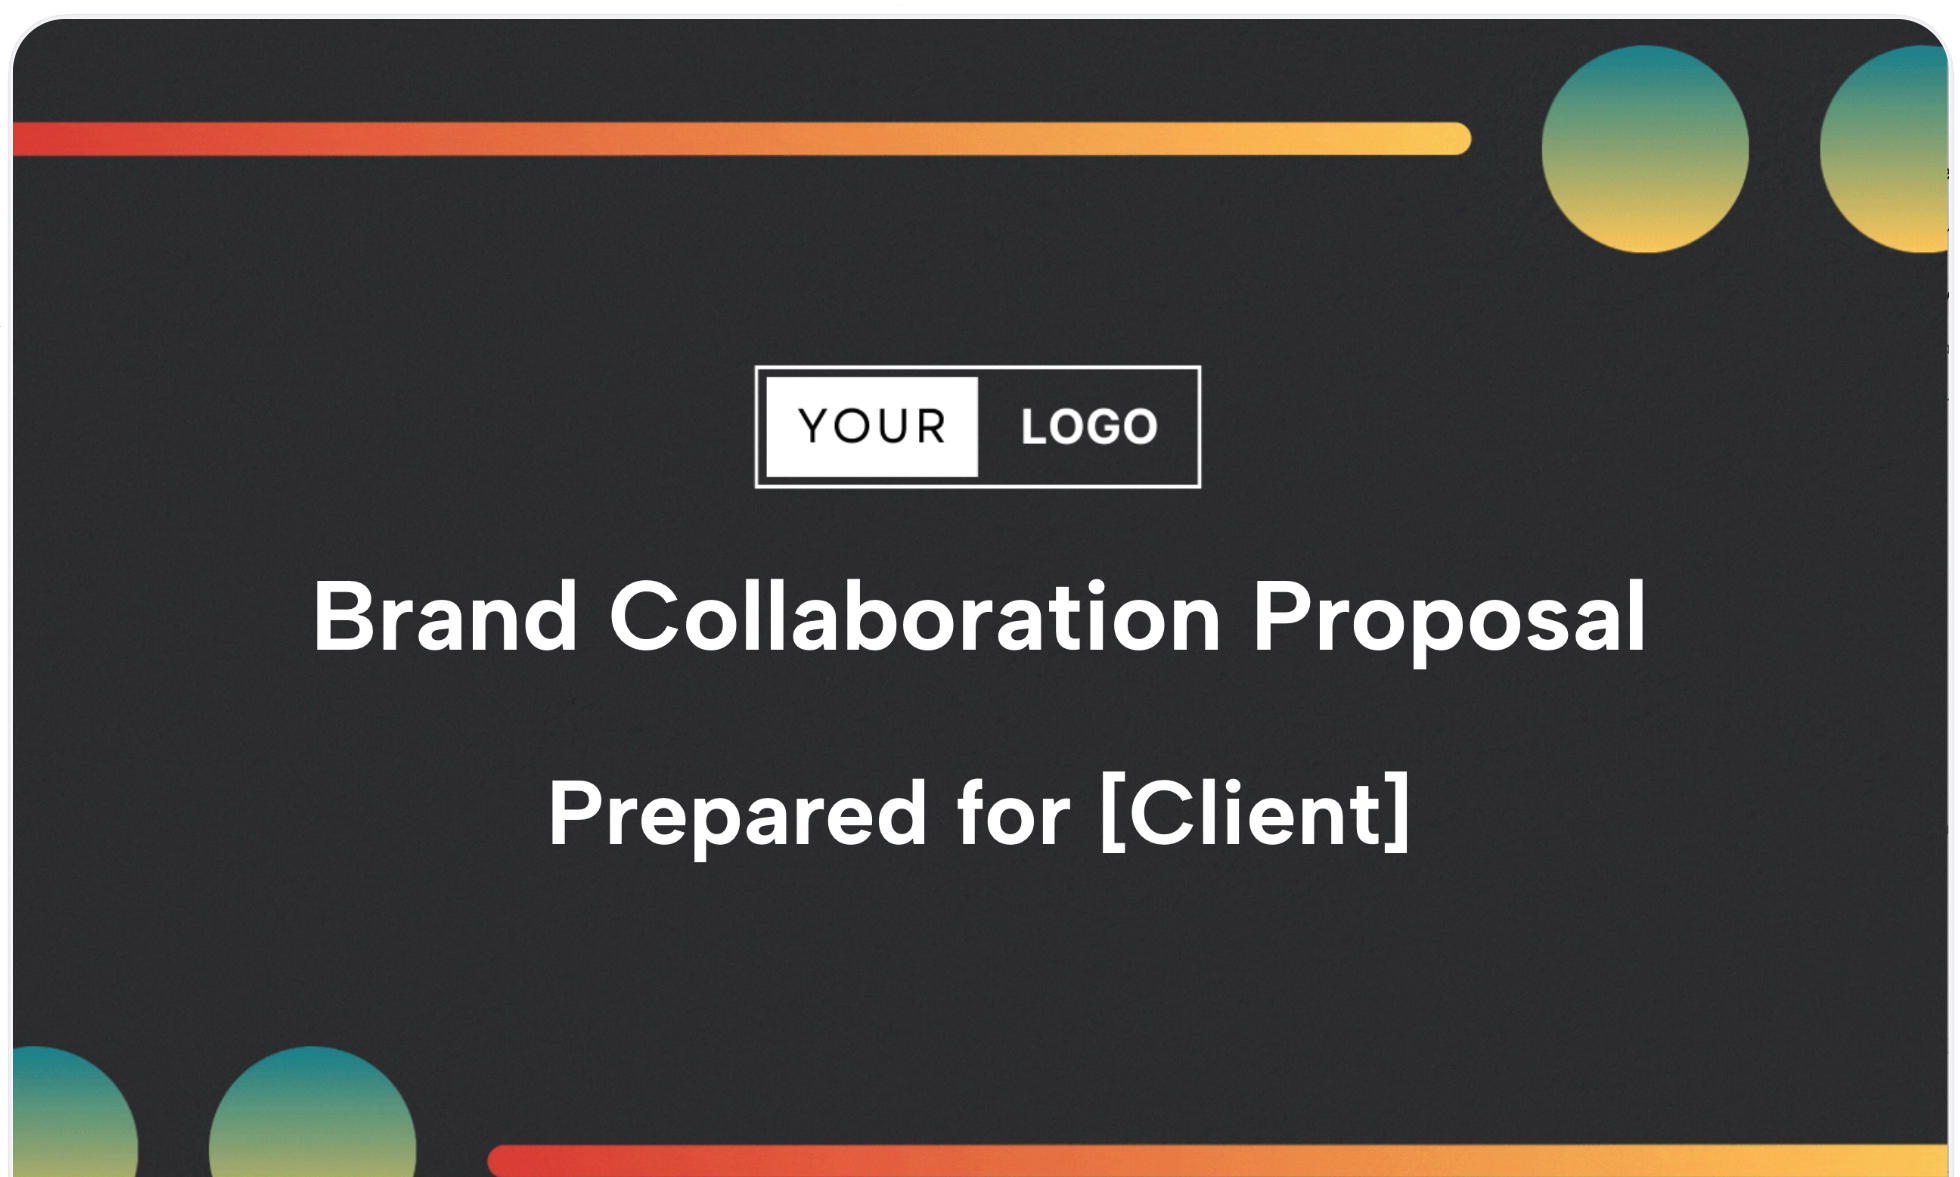 a brand collaboration proposal prepared for a client